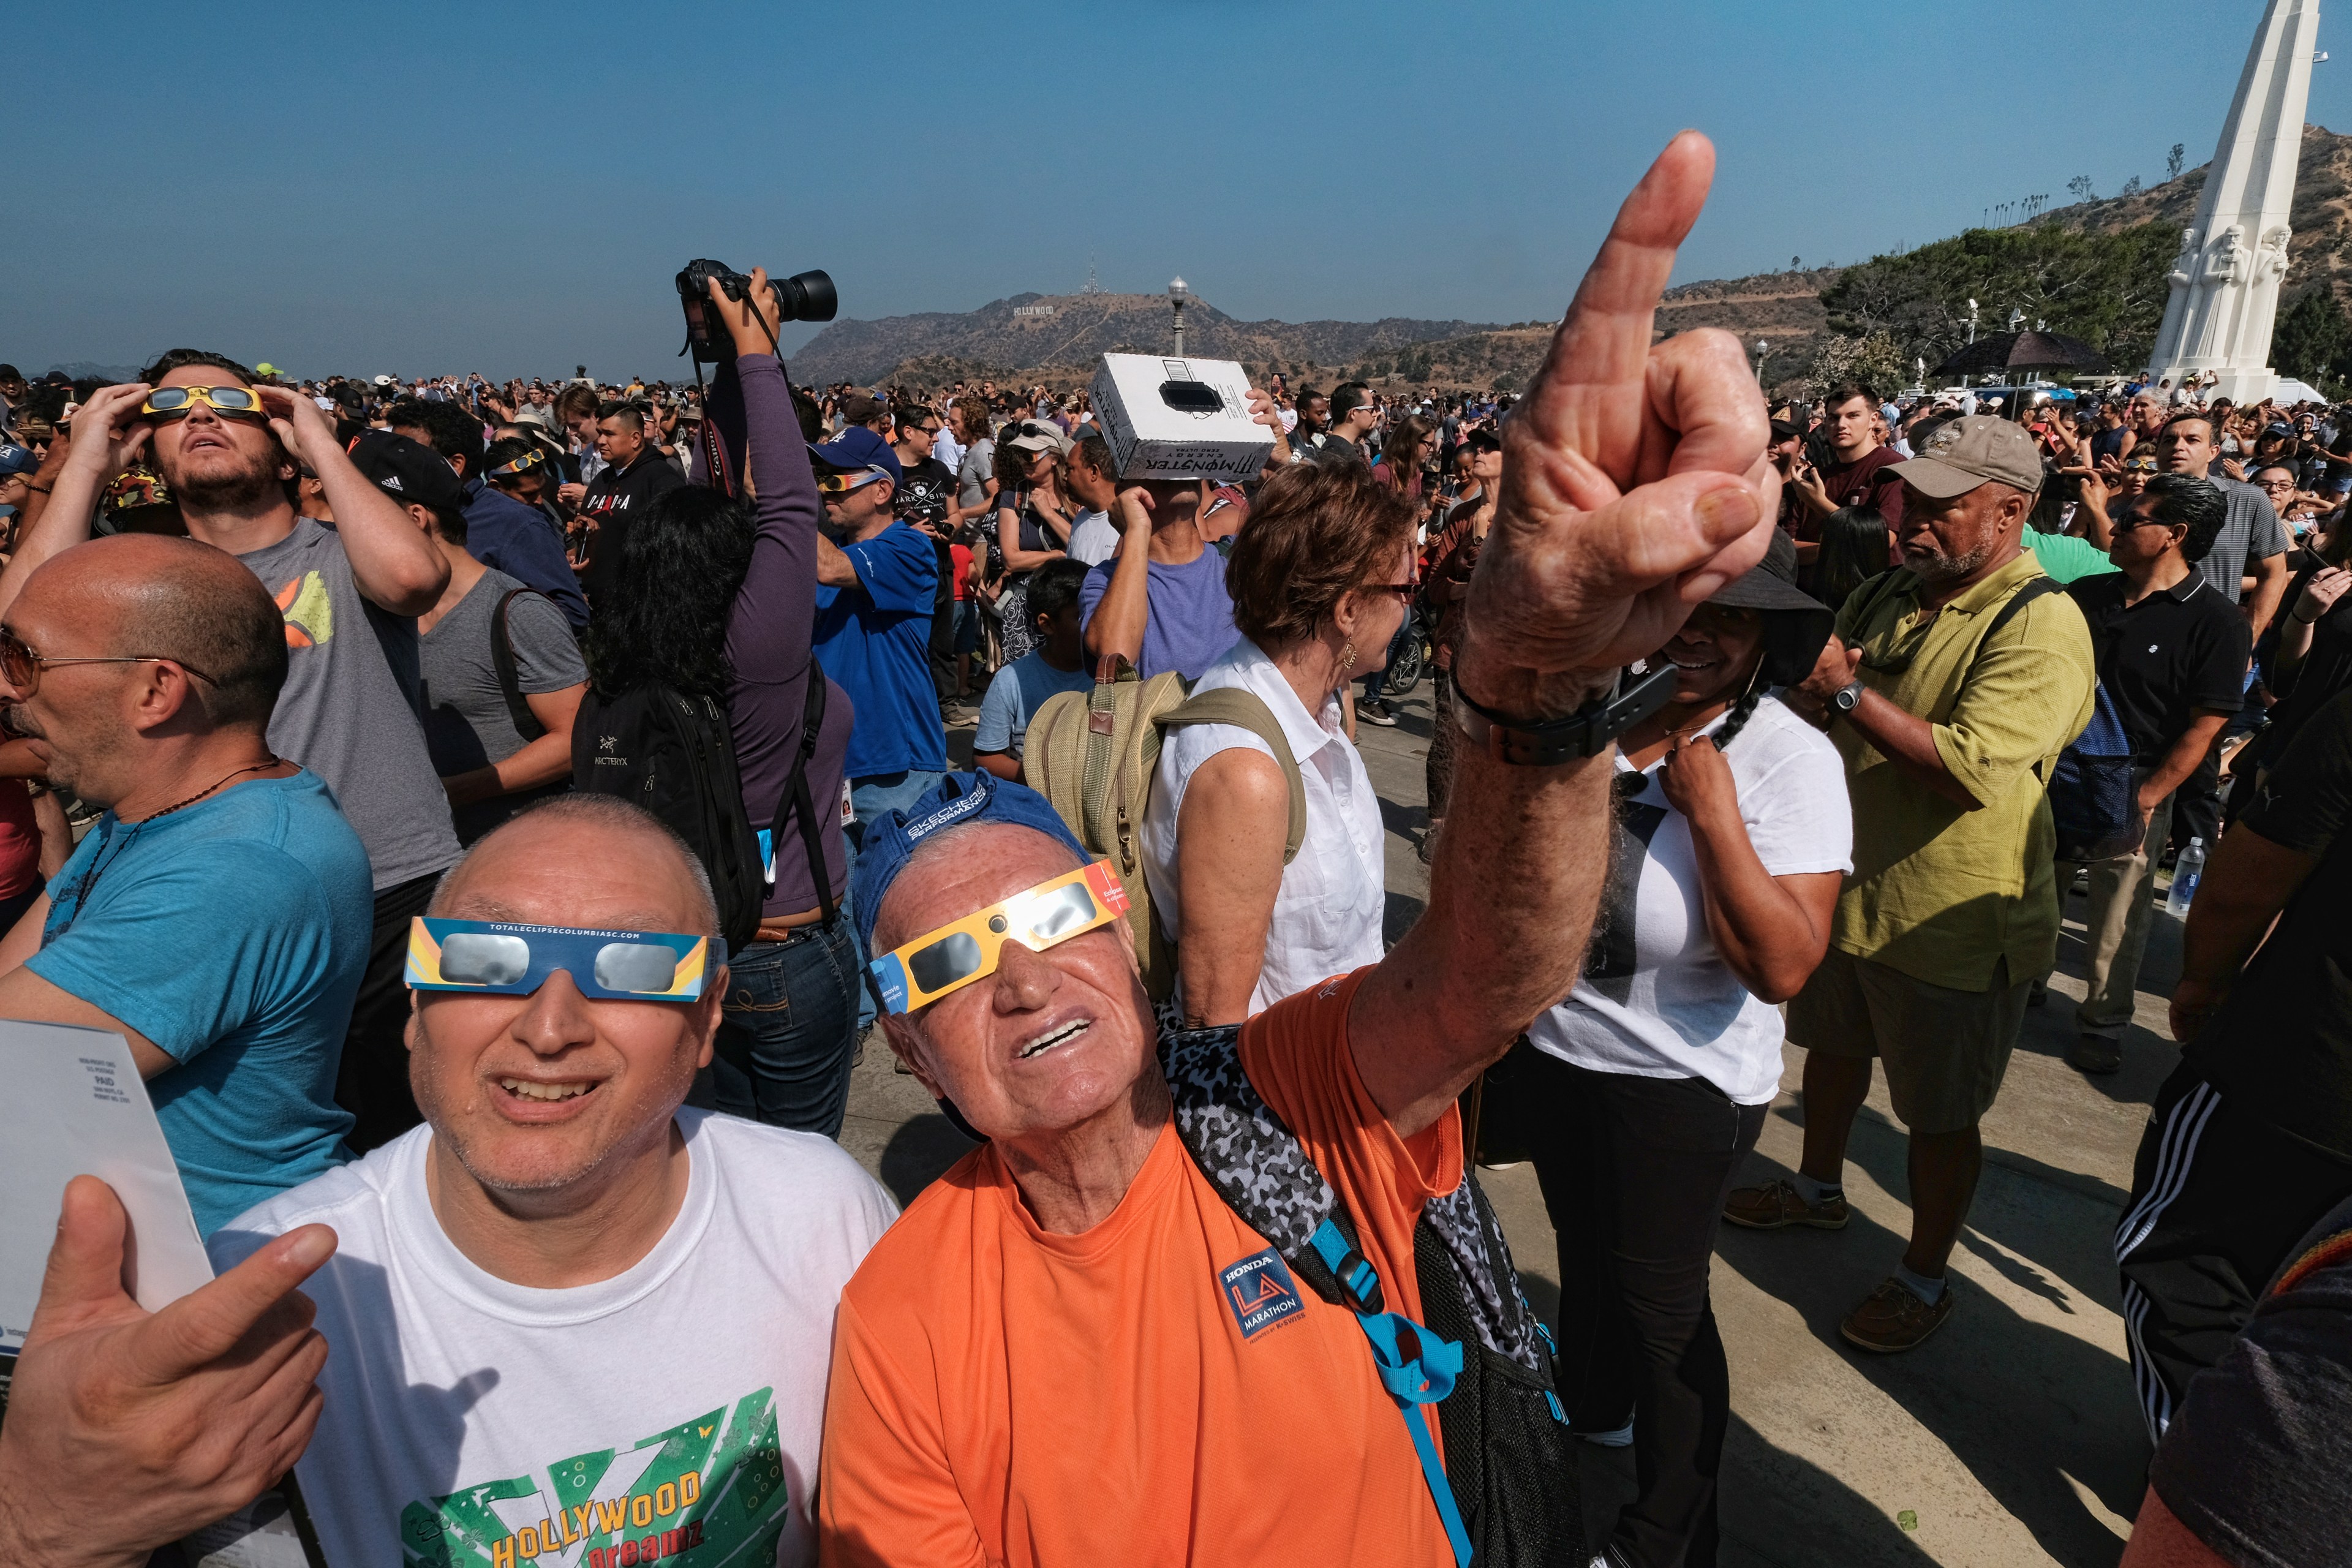 A crowd wearing special glasses looks up at the sky, likely viewing an eclipse, with excited expressions and gestures.